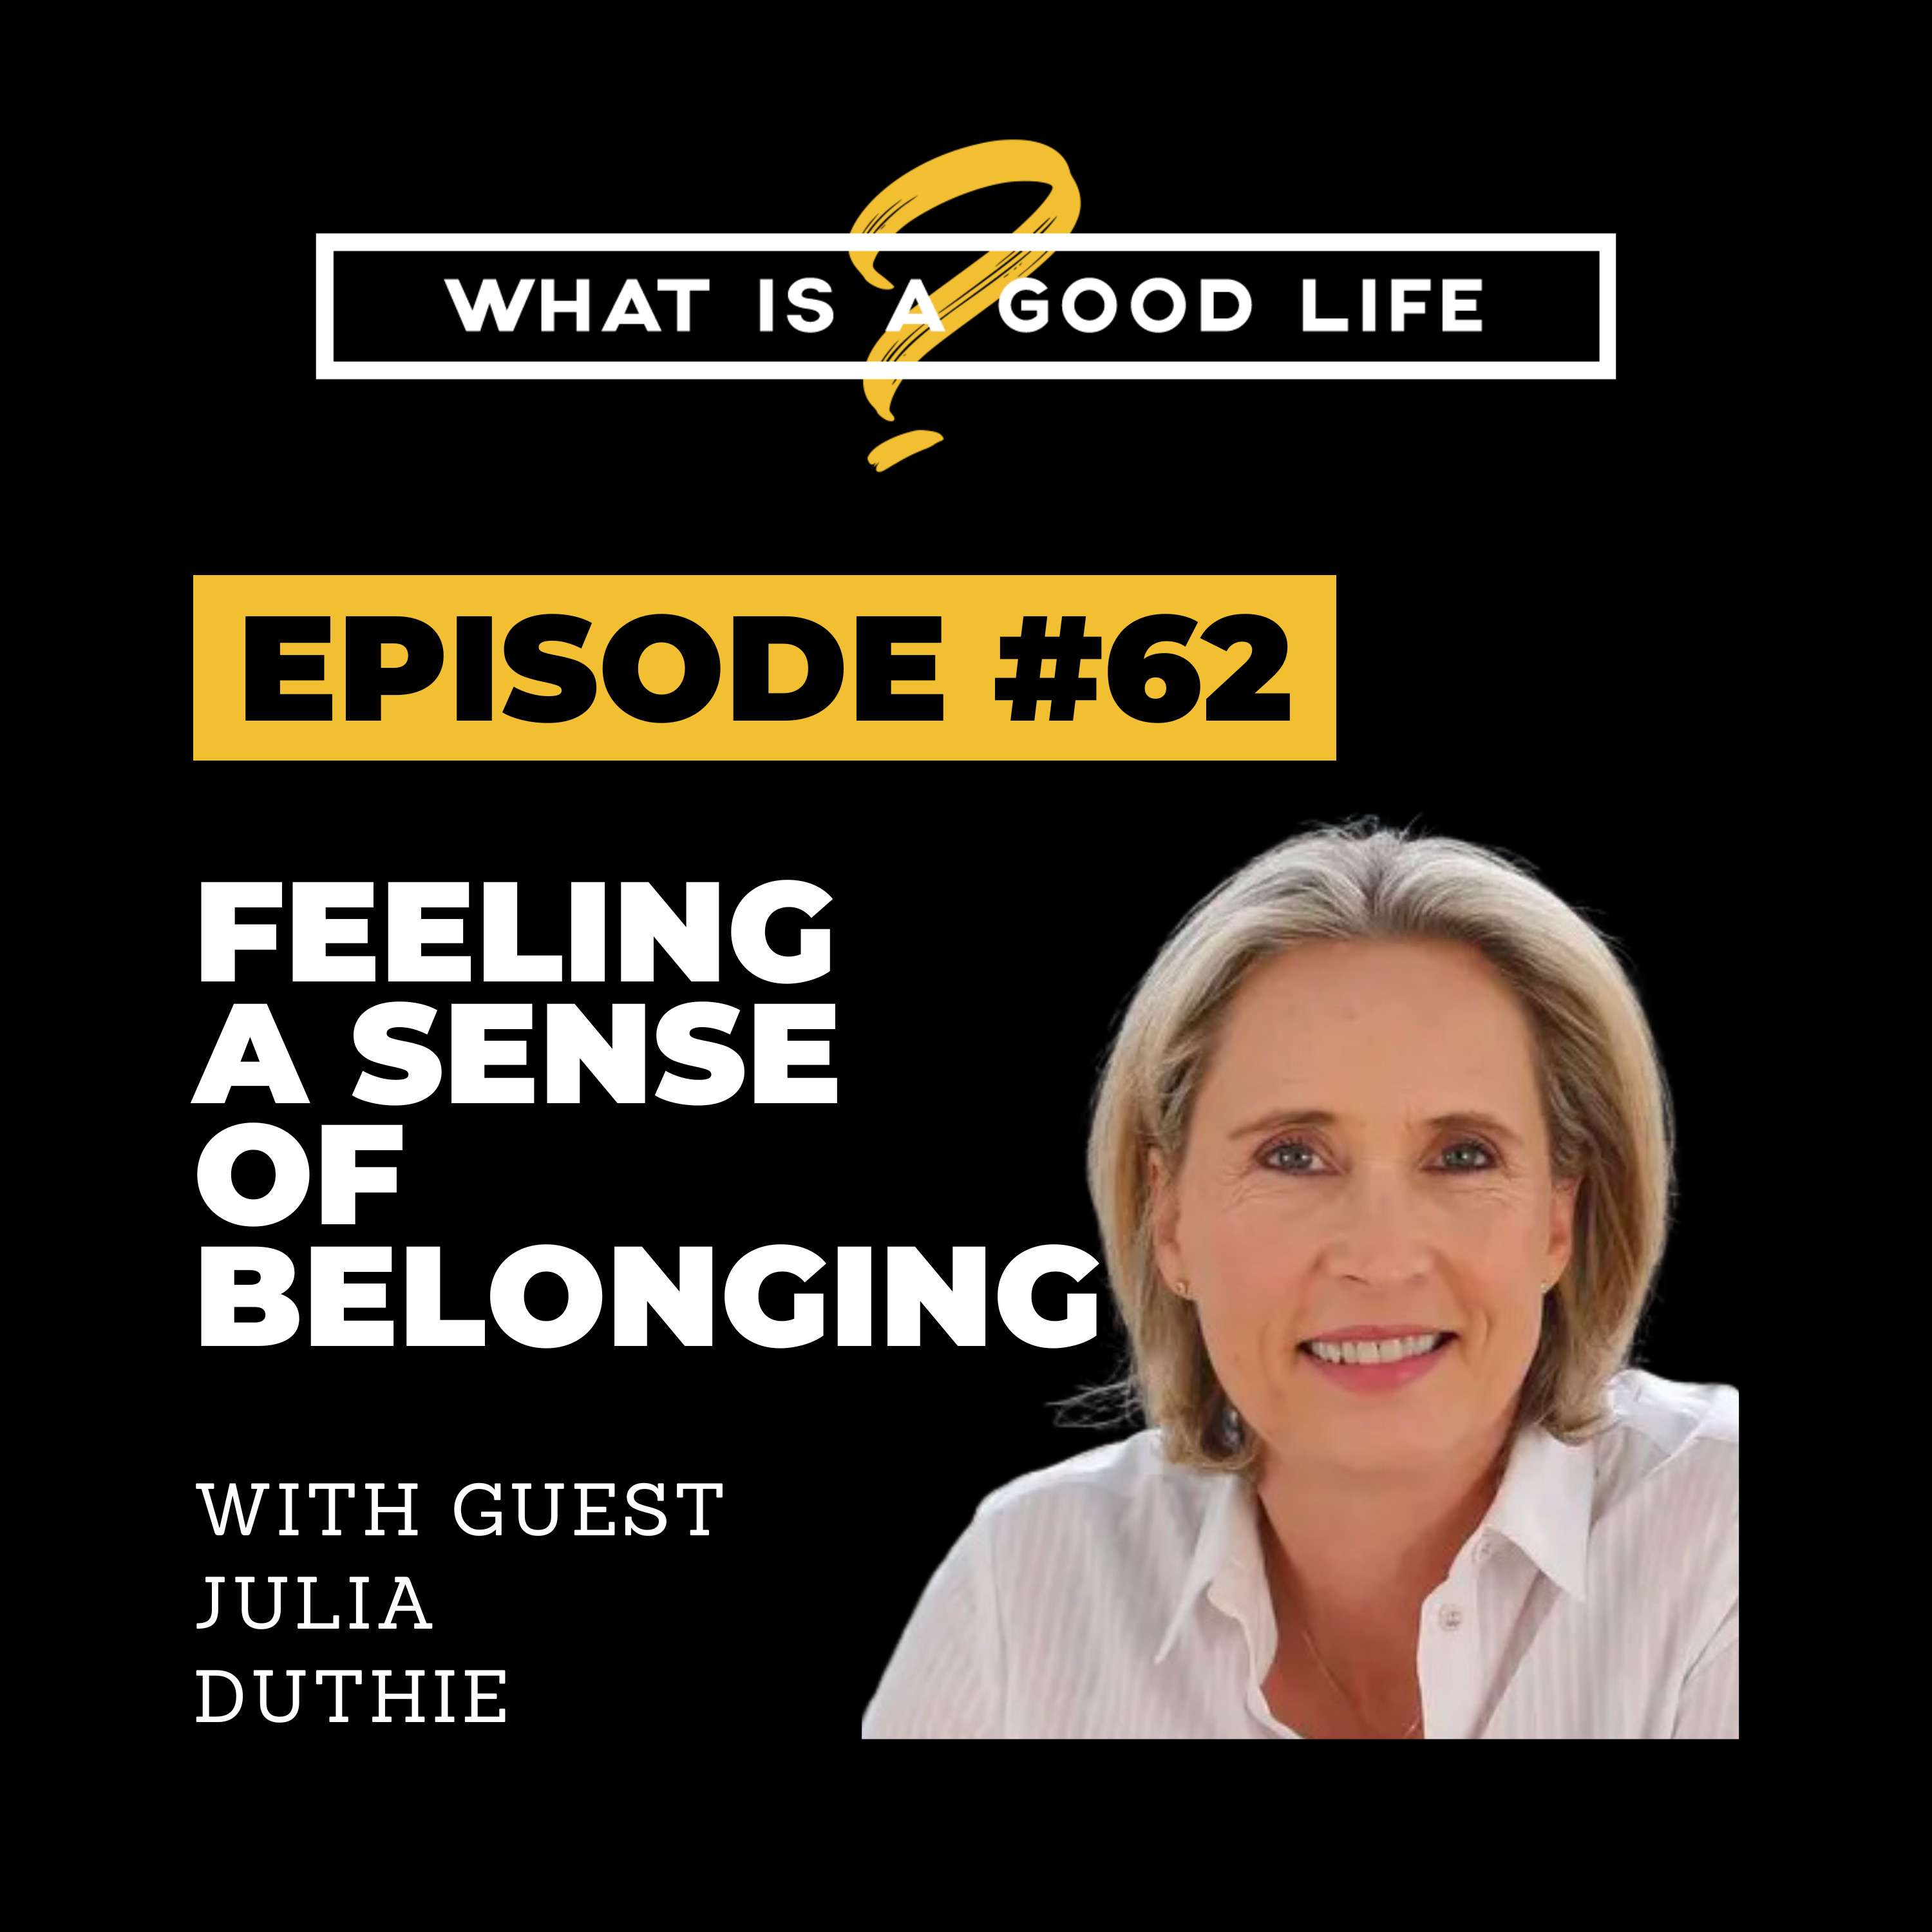 What is a Good Life? #62 - Feeling A Sense Of Belonging with Julia Duthie